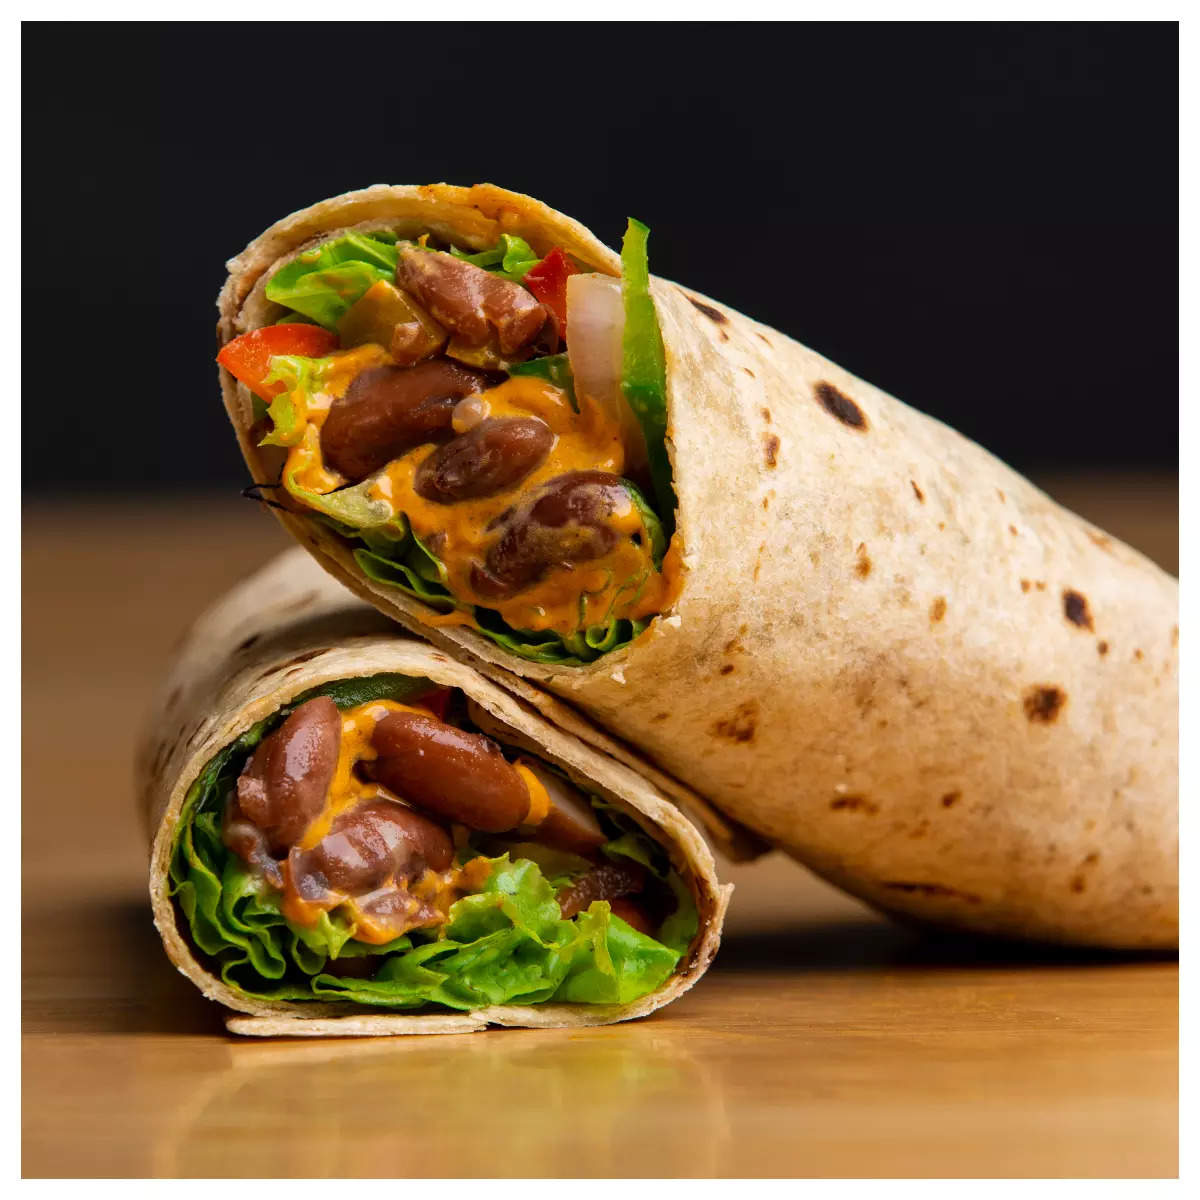 Red Kidney Beans Wrap Recipe: How to Make Red Kidney Beans Wrap Recipe